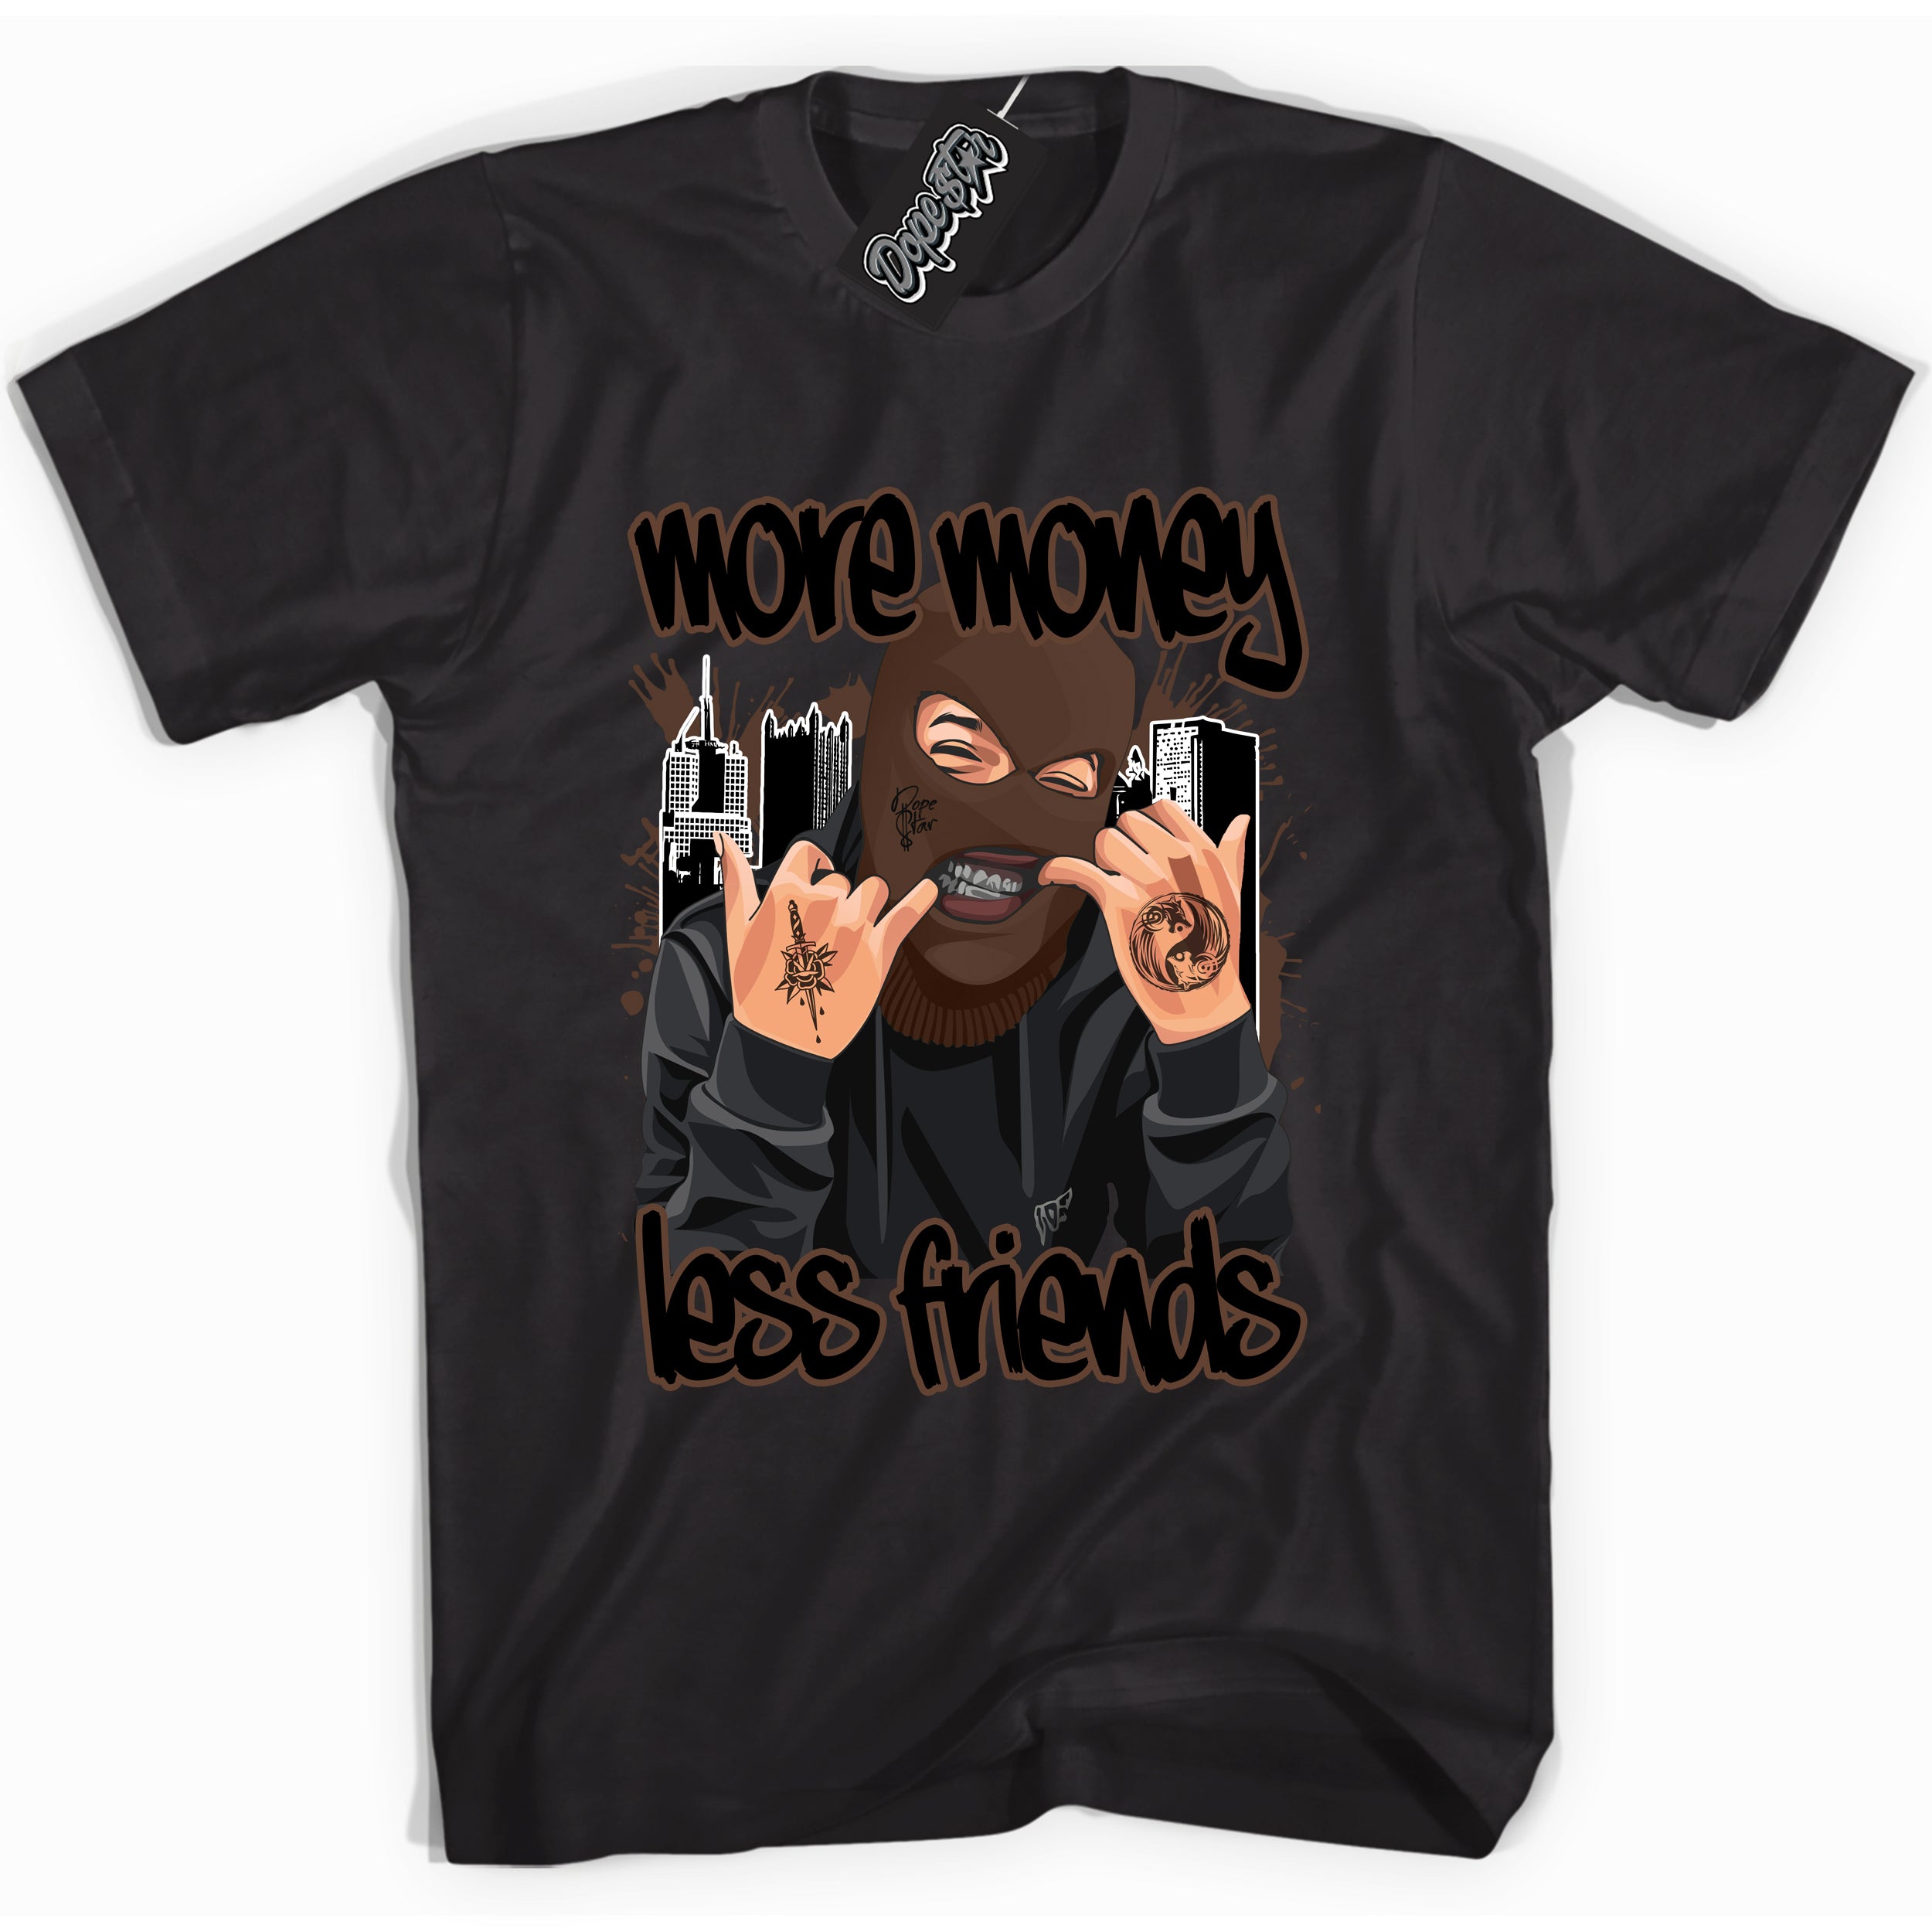 Cool Black graphic tee with “ More Money Less Friends ” design, that perfectly matches Palomino 1s sneakers 